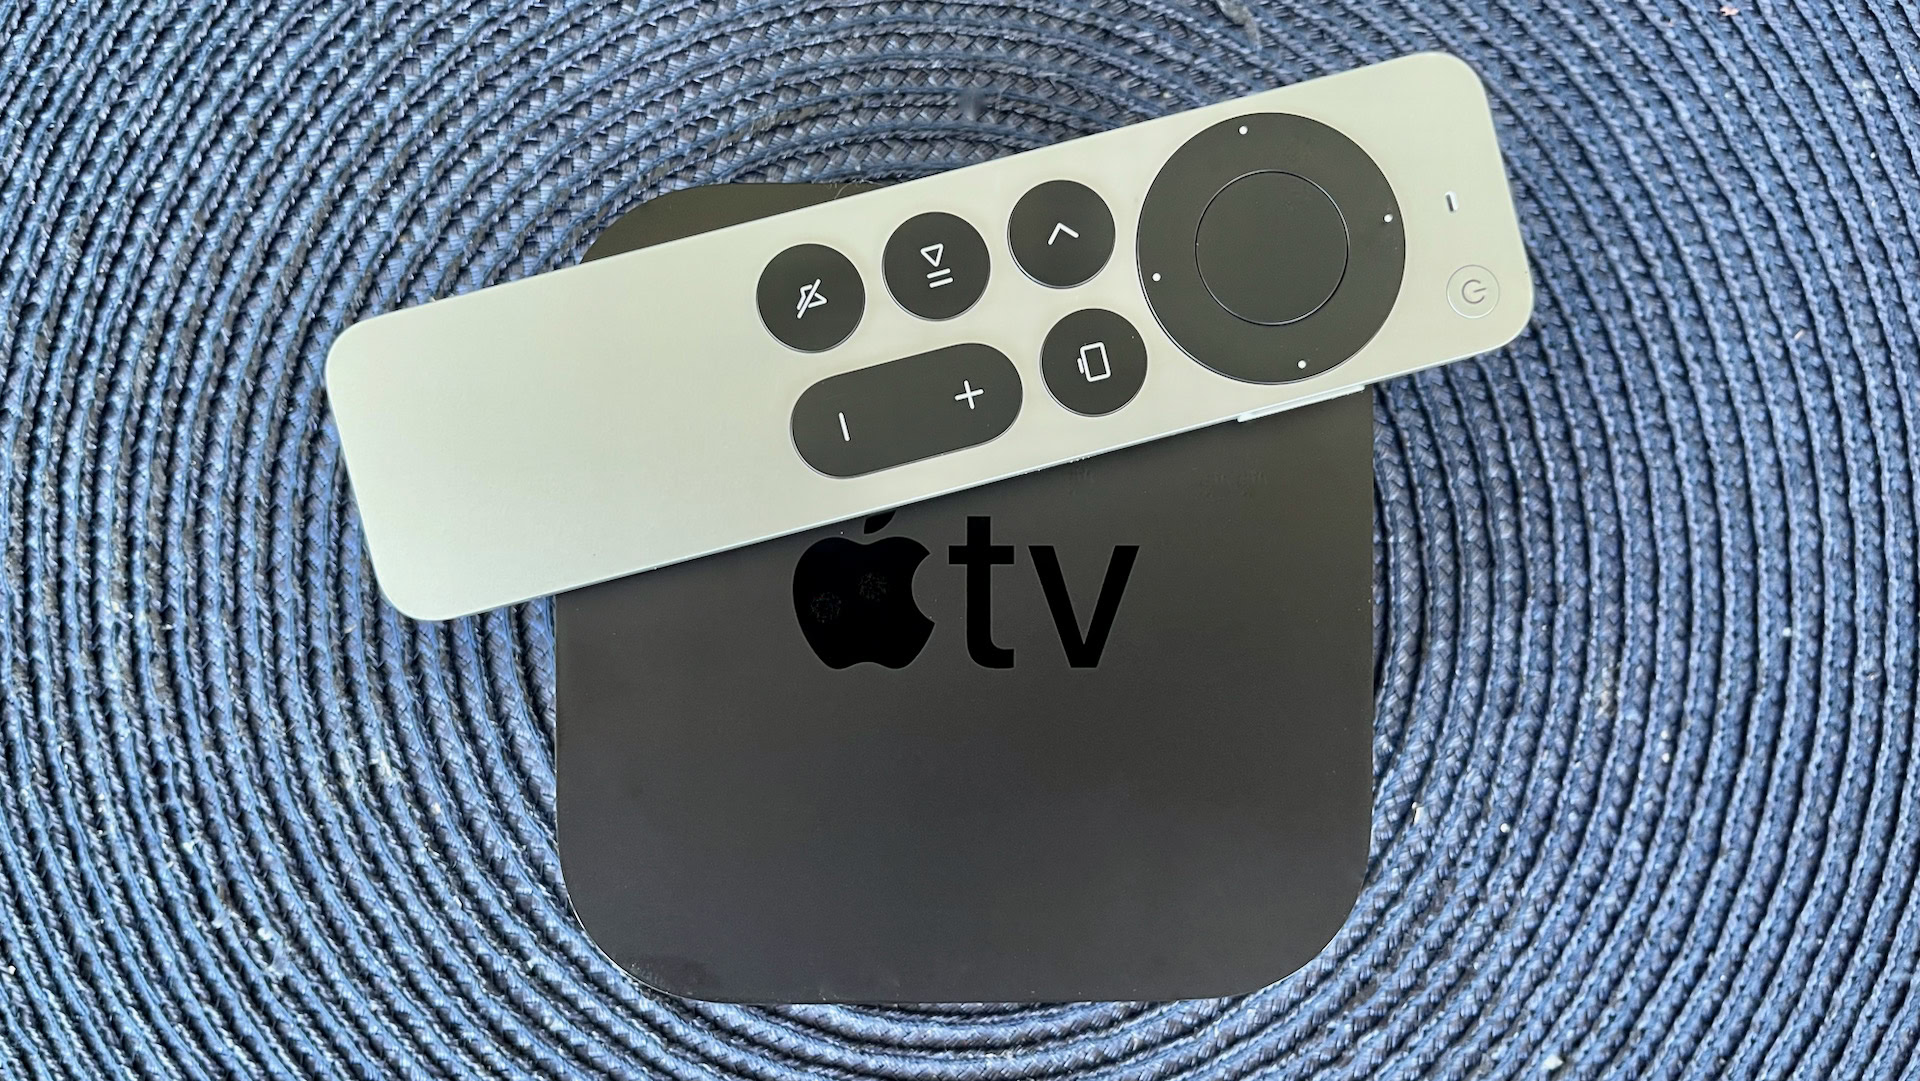 what is wrong with this app? cannot press play? : r/appletv